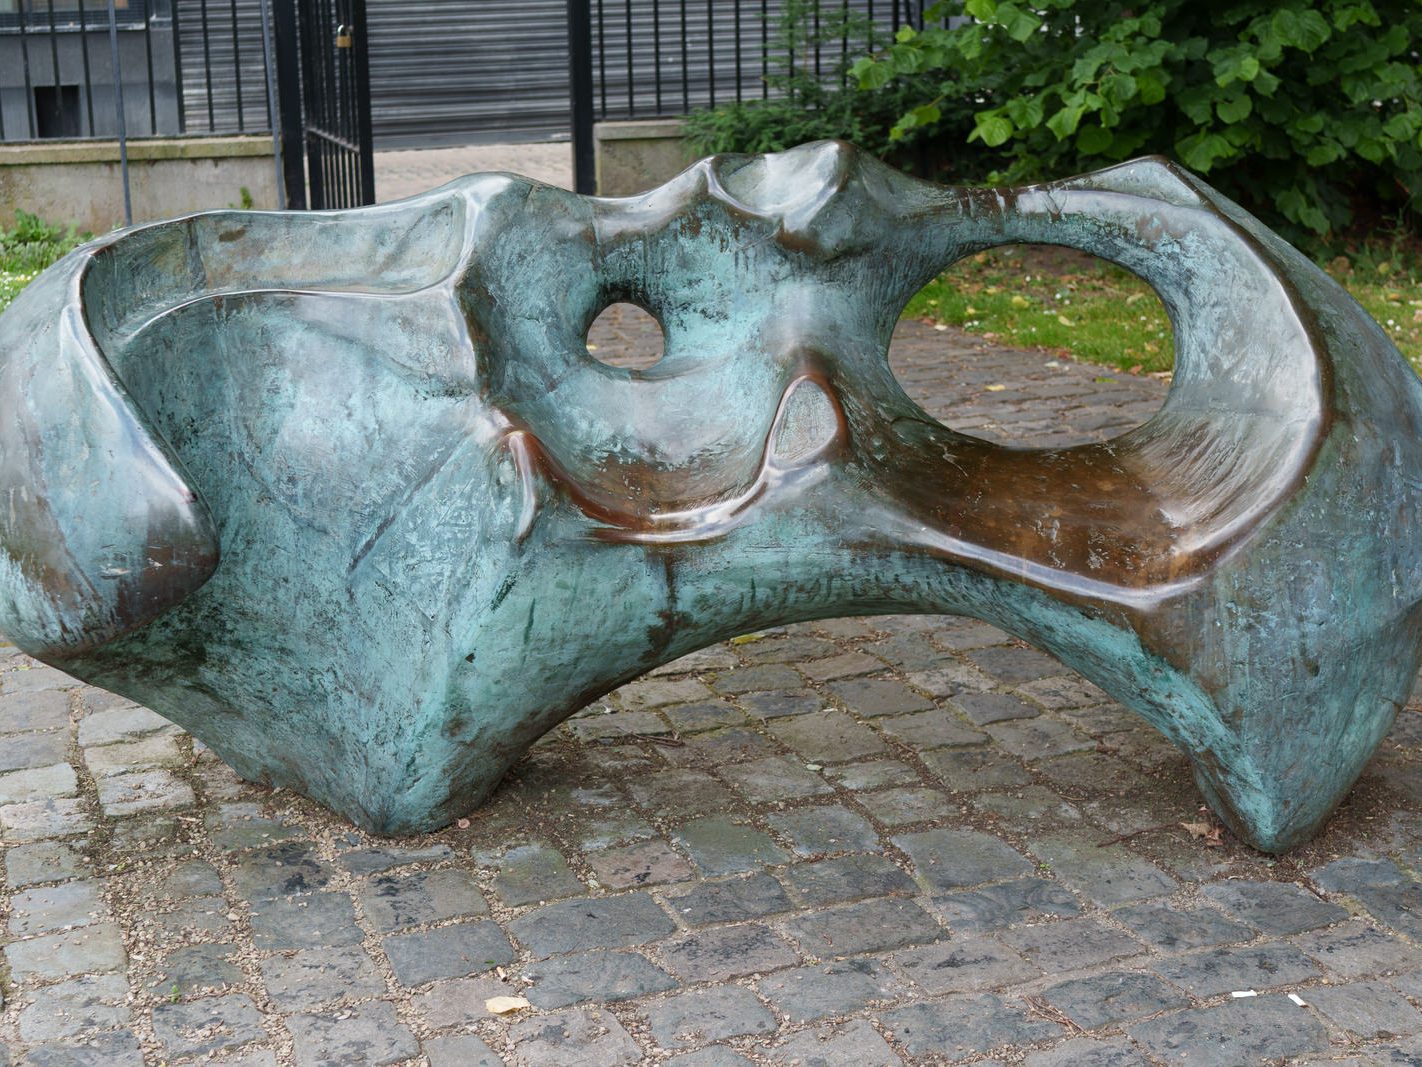 THE ADULT AND CHILD SEAT IN ST CATHERINE'S PARK [AN INTERESTING BRONZE SCULPTURE BY JIM FLAVIN] 001